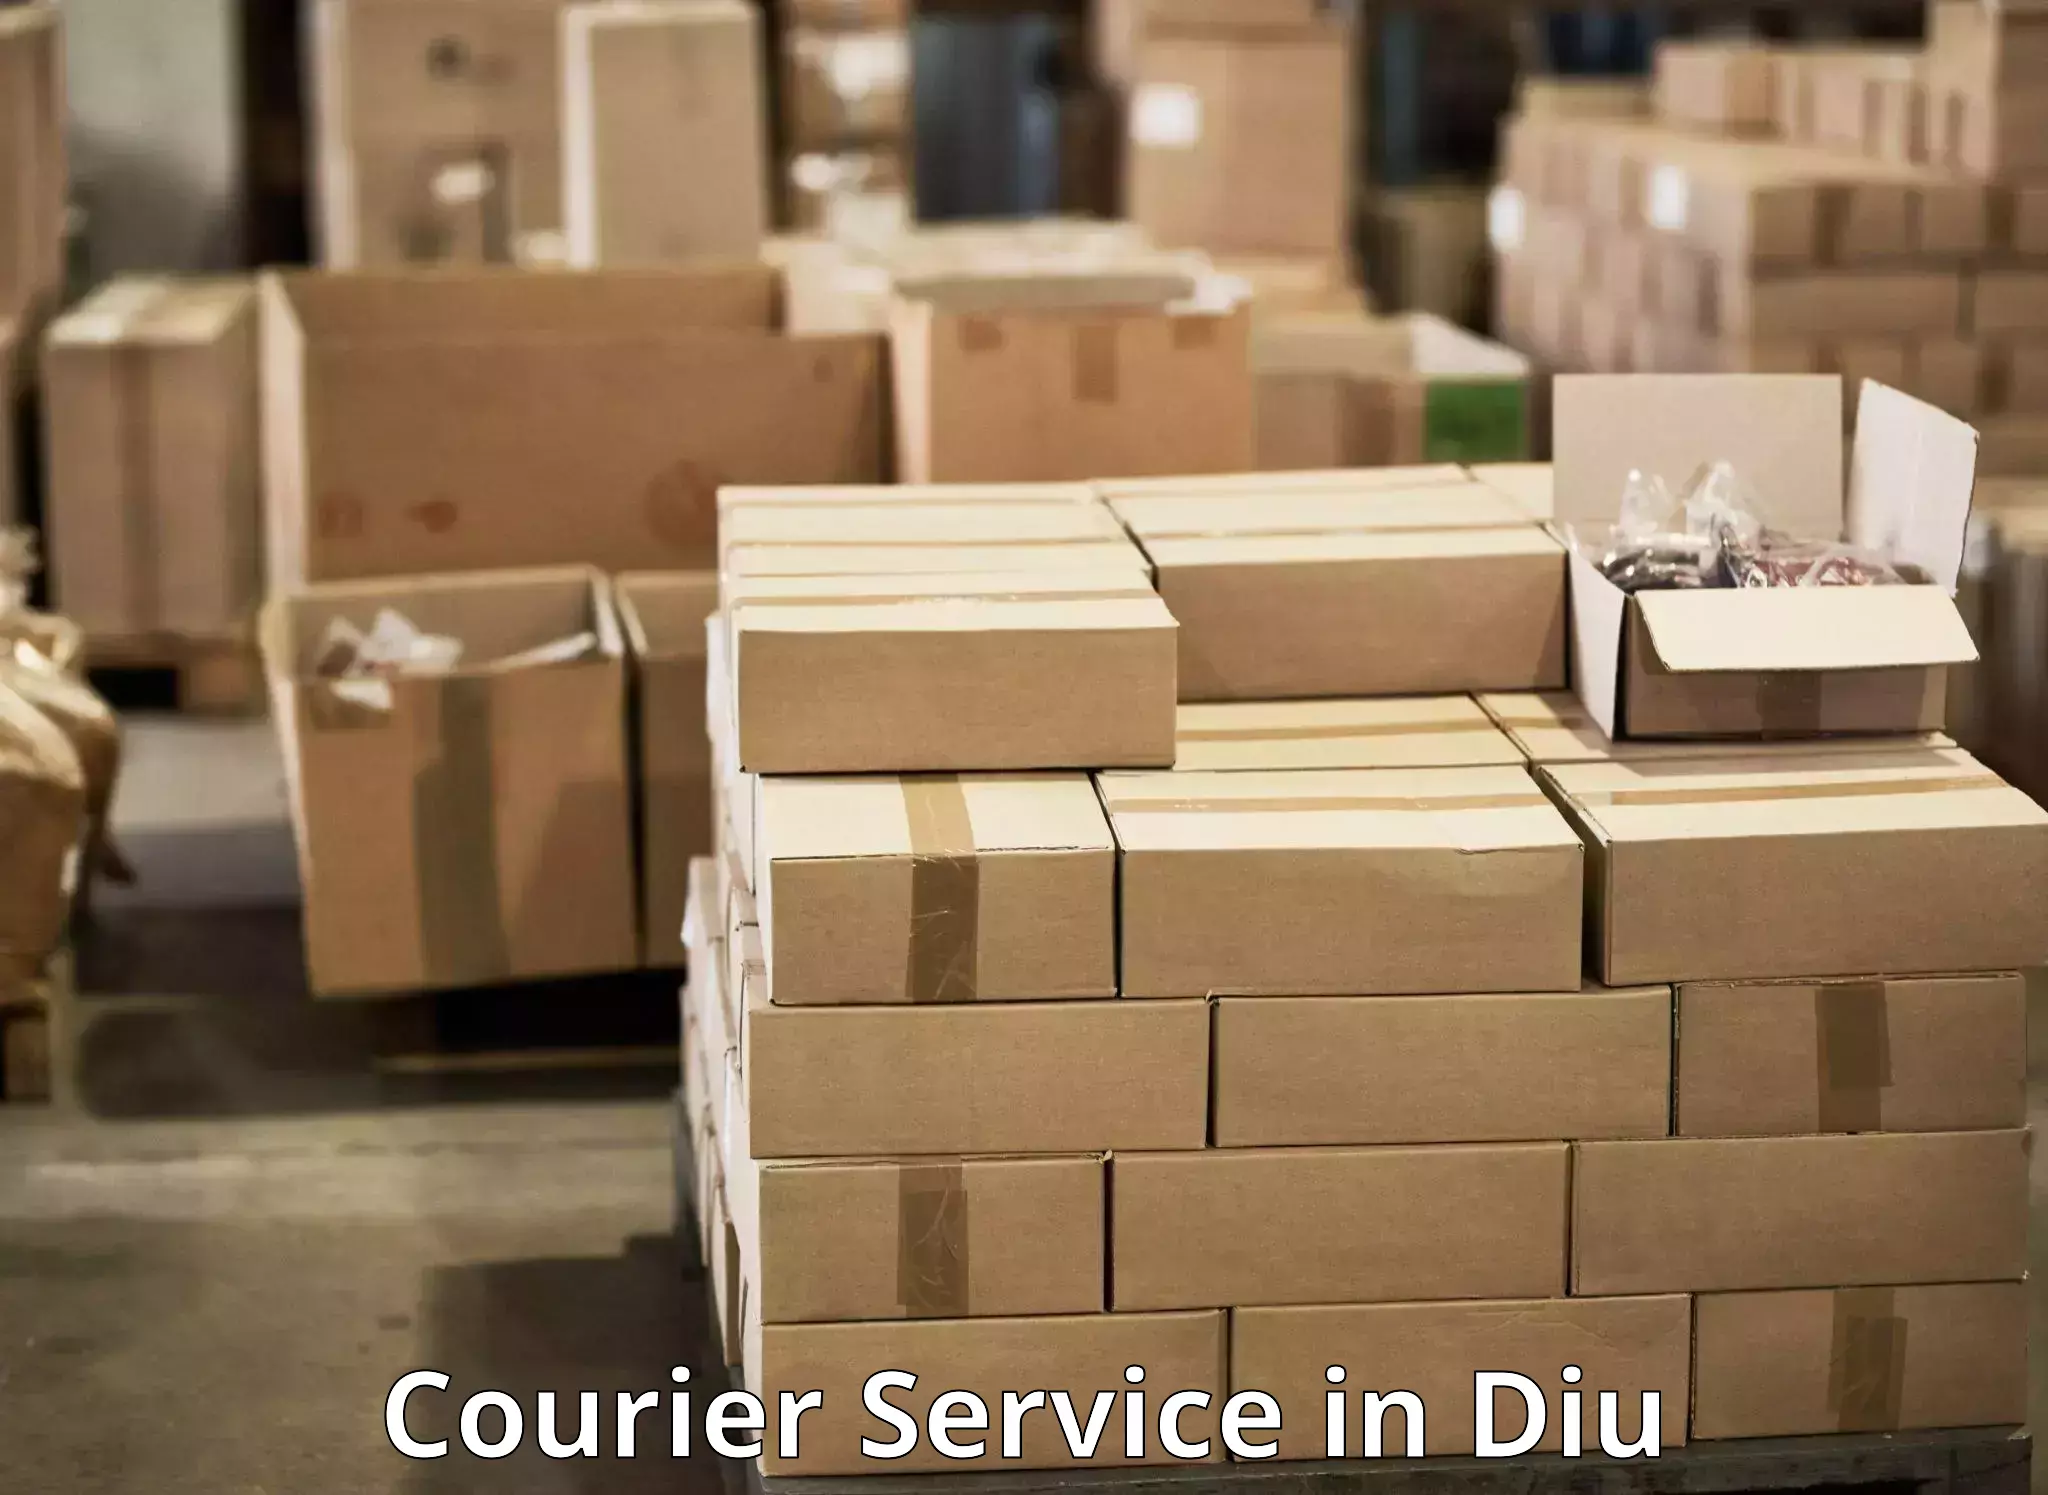 Modern delivery technologies in Diu